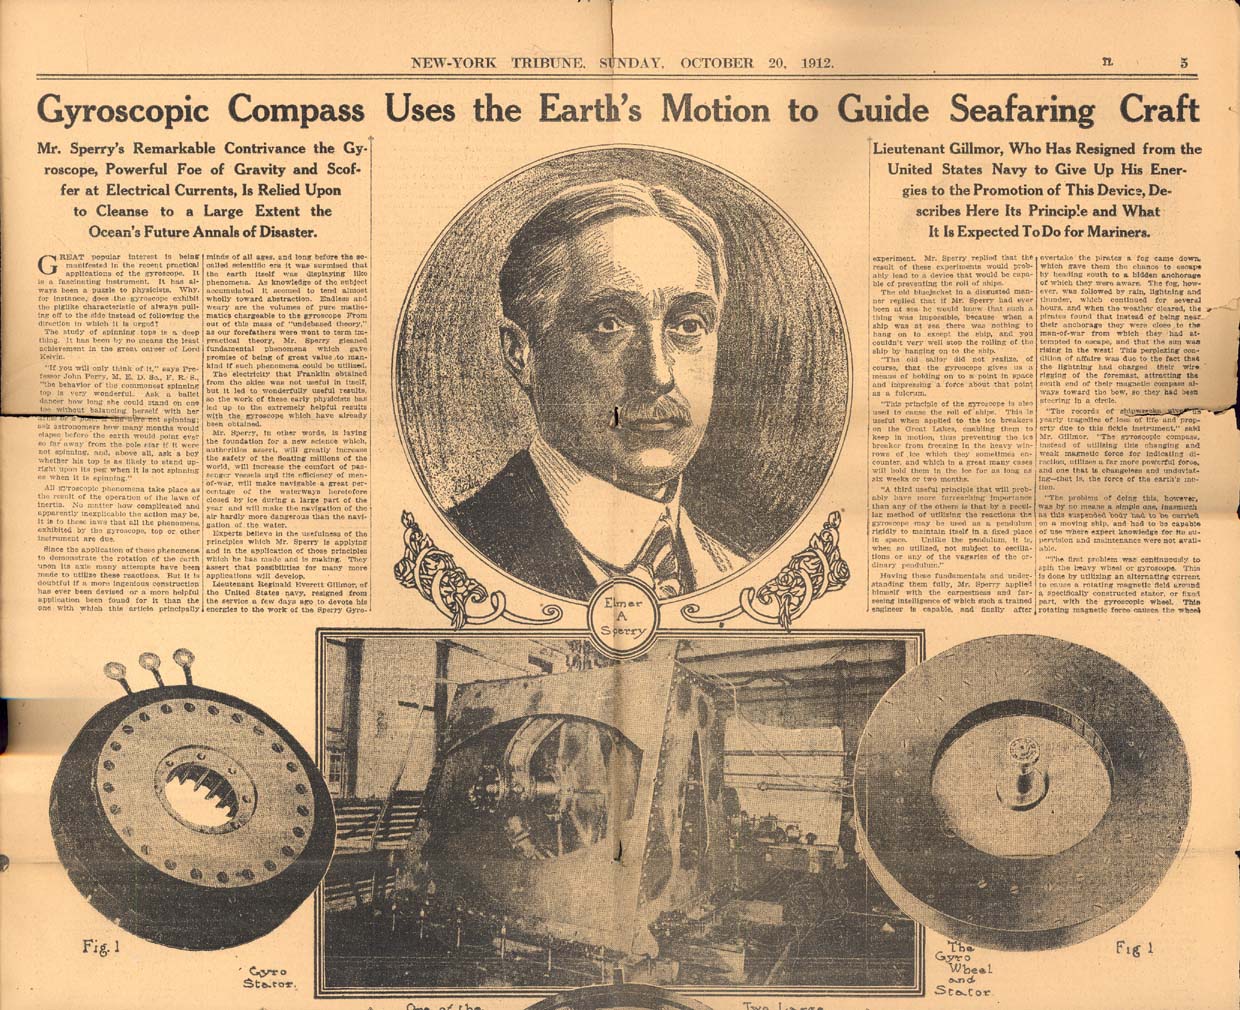 Newspaper article featuring Elmer Sperry and his gyroscopic compass